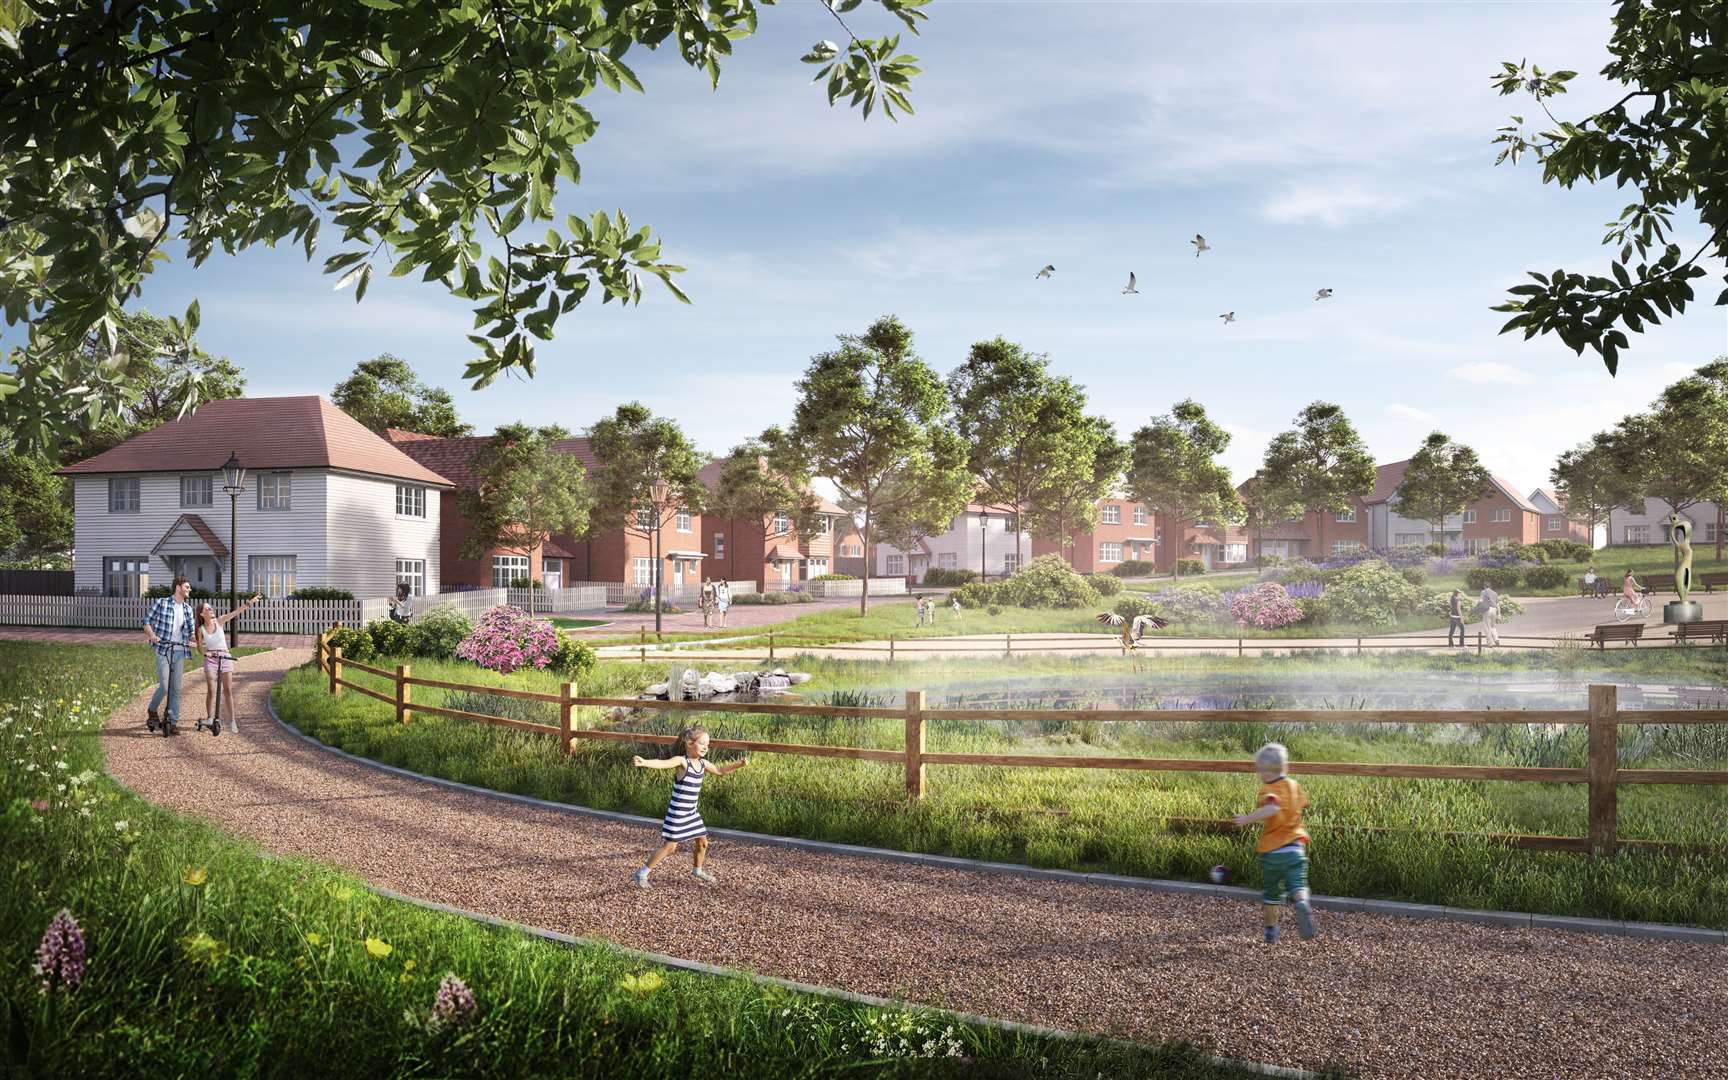 How the Large Burton development could look